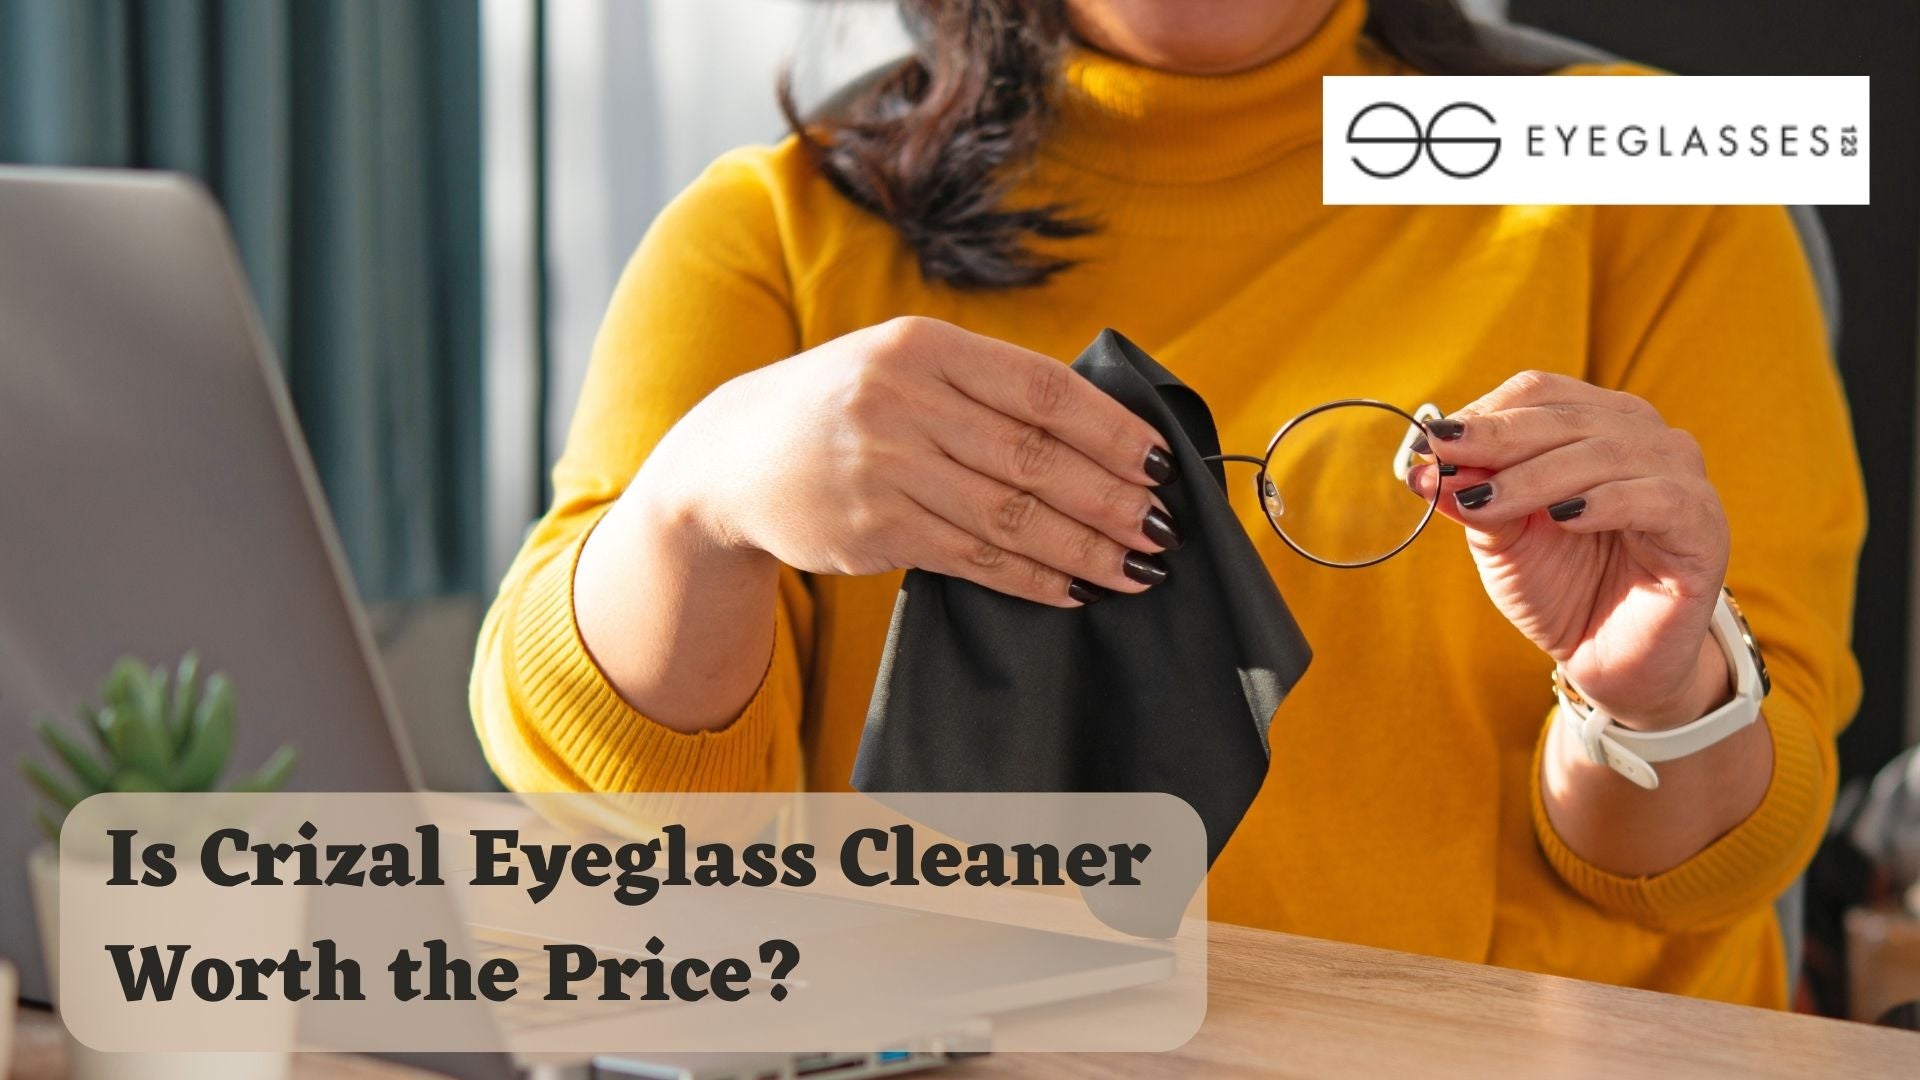 Is Crizal Eyeglass Cleaner Worth the Price?